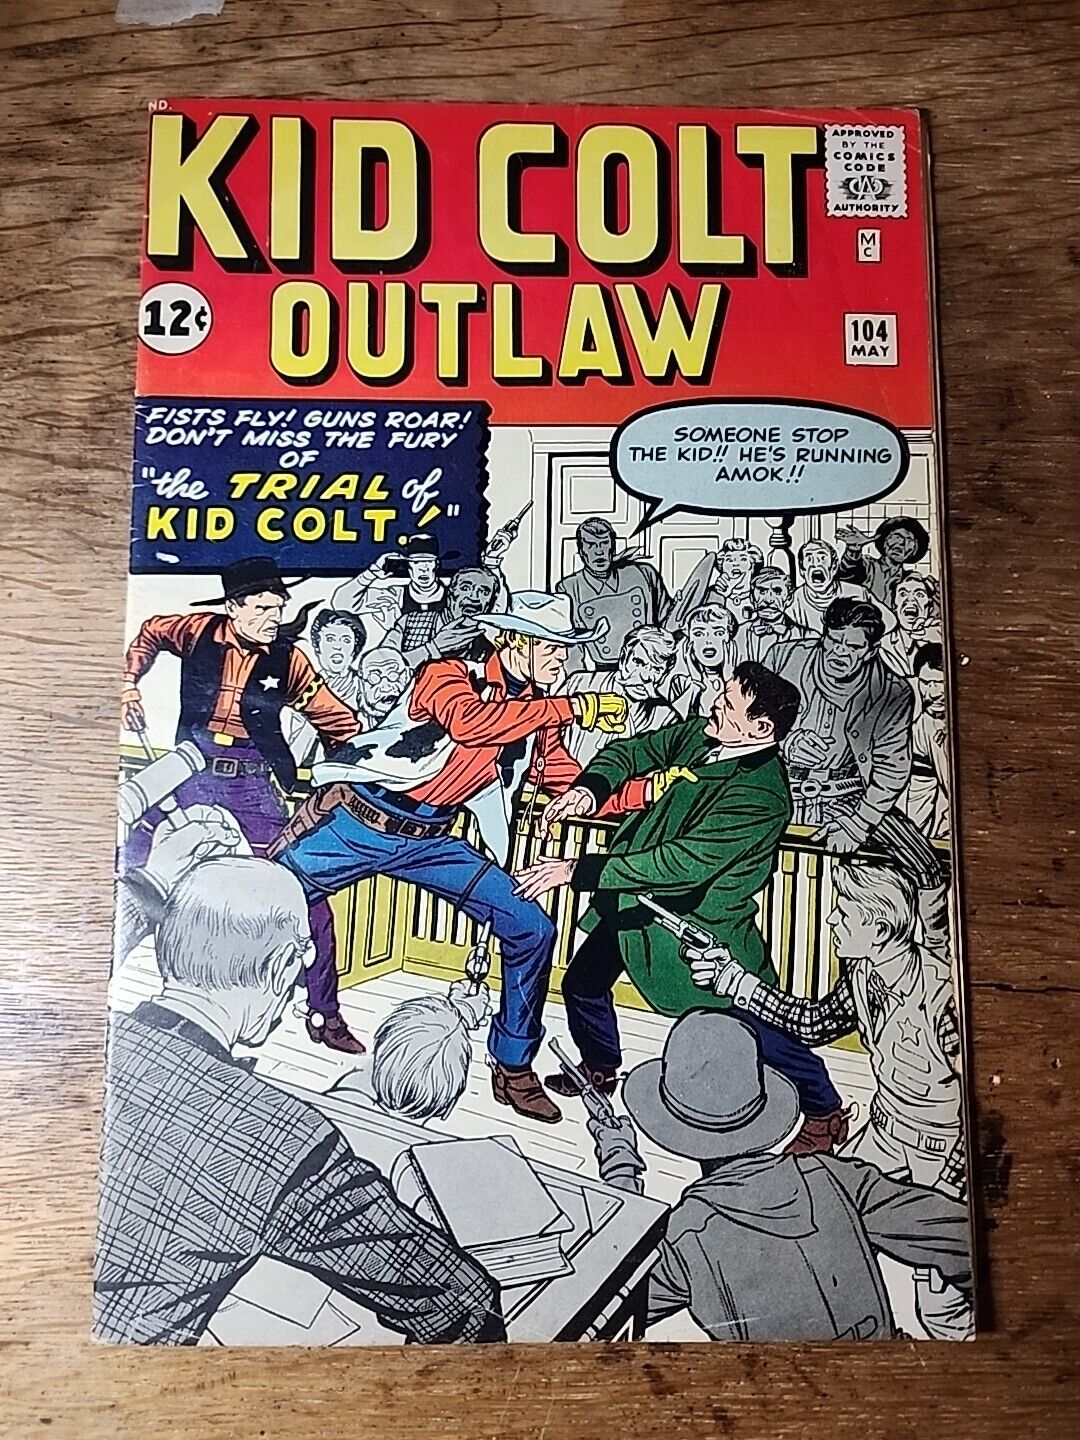 Kid Colt Outlaw Issue 104 May 1962 Kirby Cover Marvel Silver Age Cowboy Comic